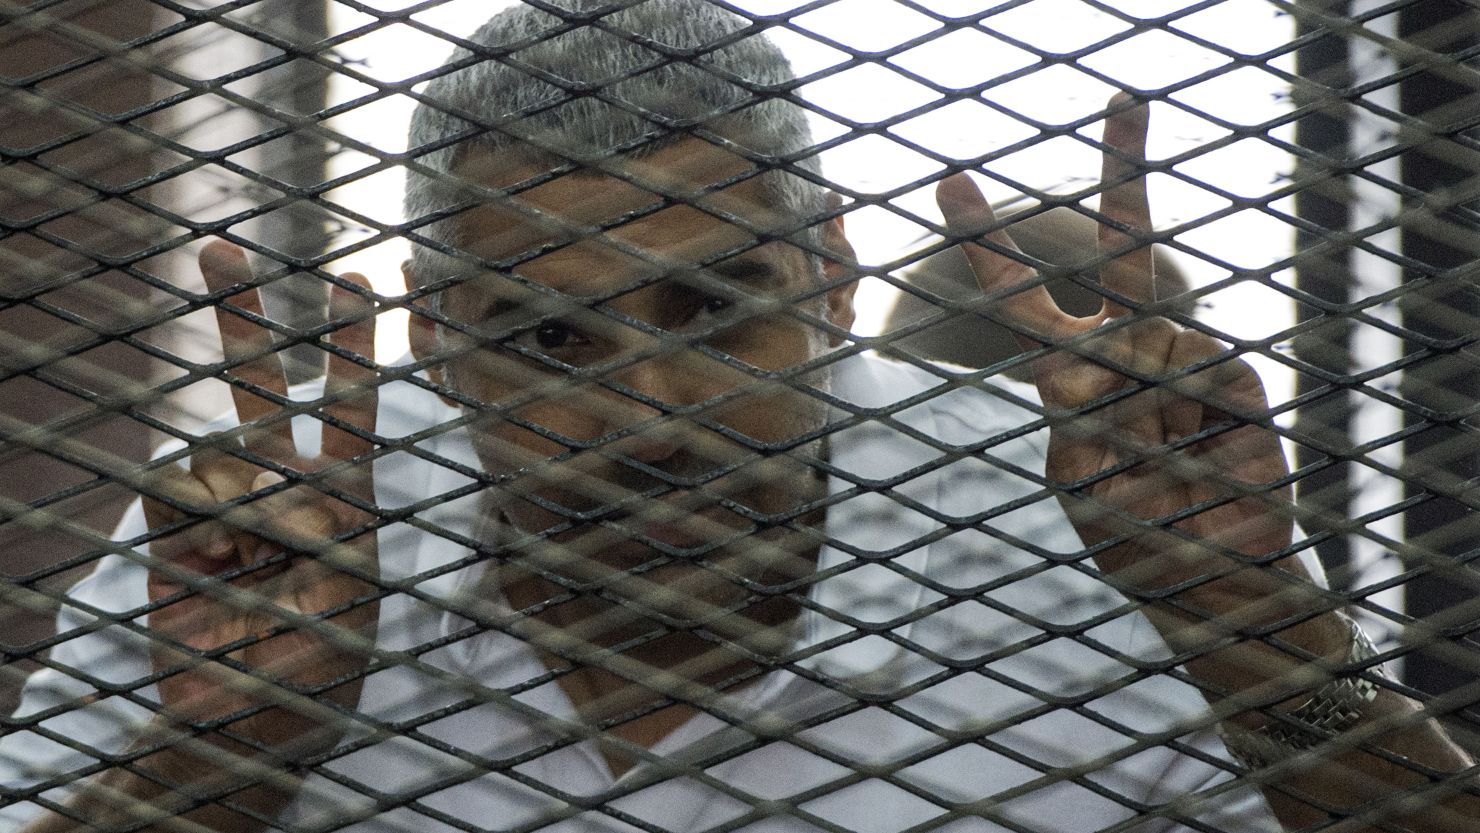 File: Al-Jazeera journalist Mohamed Fahmy, pictured under detention in June 2014, is suing the network for $100 million.